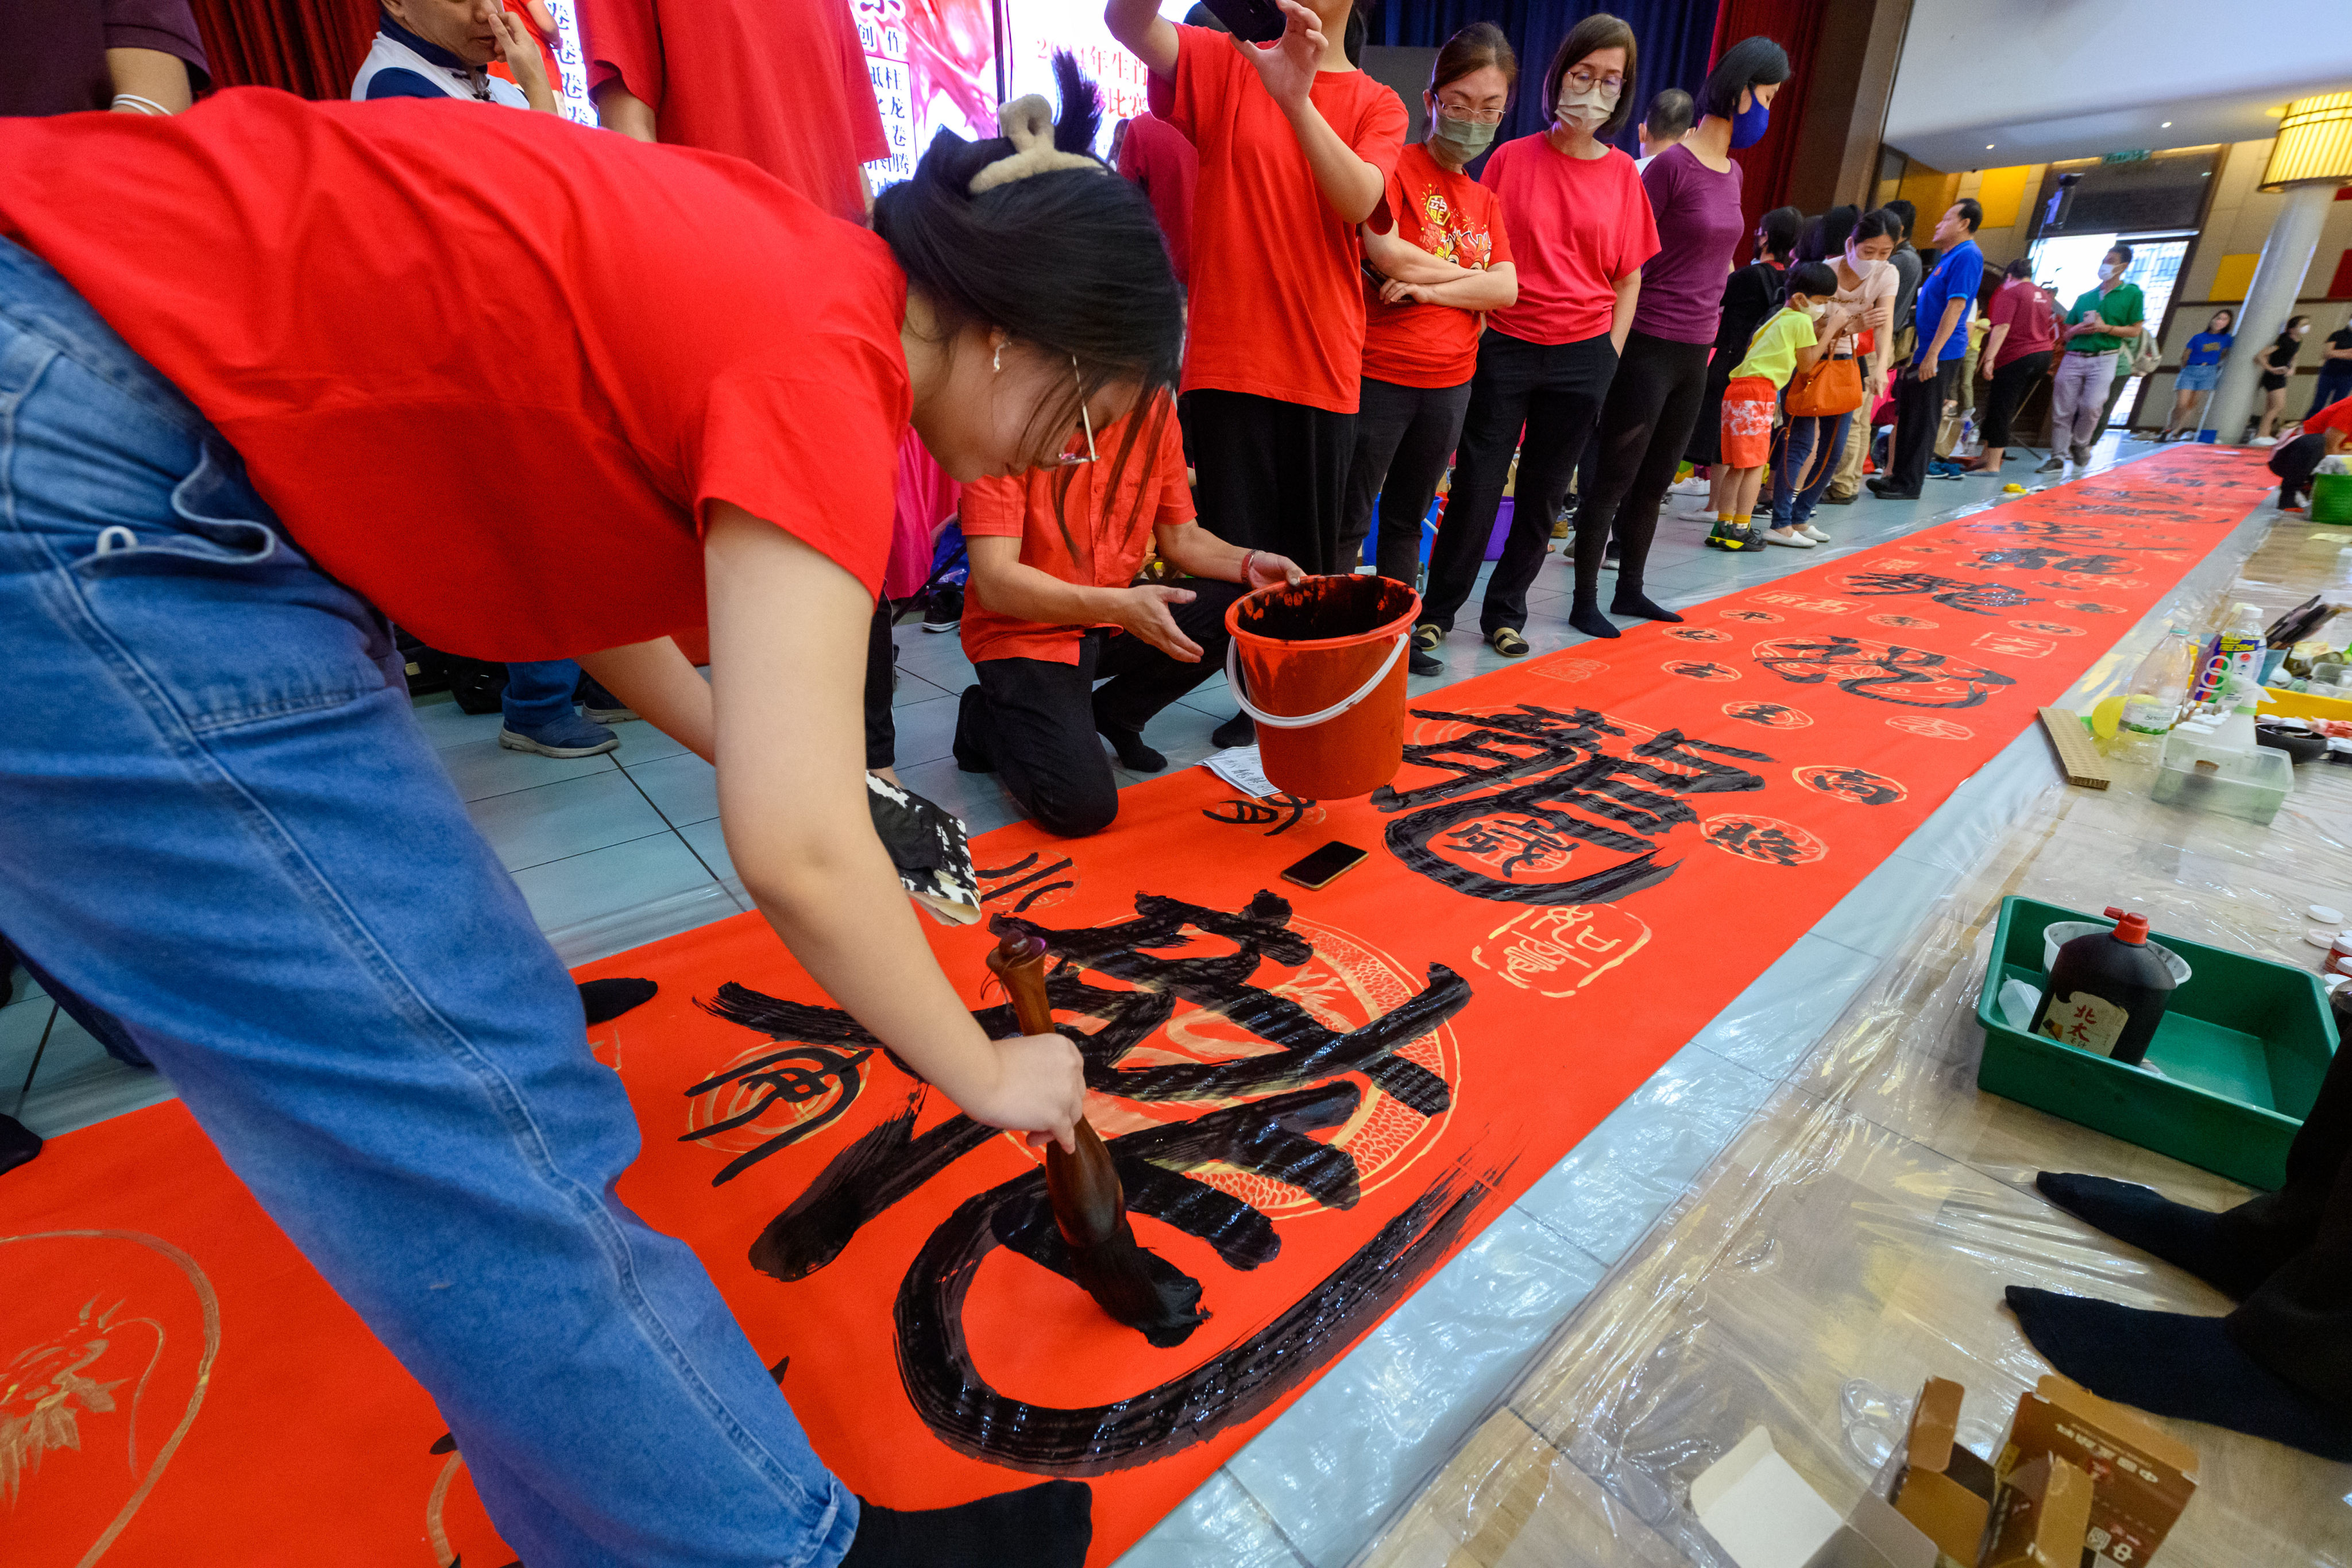 Students create a long scroll in Klang, Selangor state, Malaysia, on January 28 to celebrate the coming Lunar New Year of the Dragon. Photo: Chong Voon Chung/Xinhua